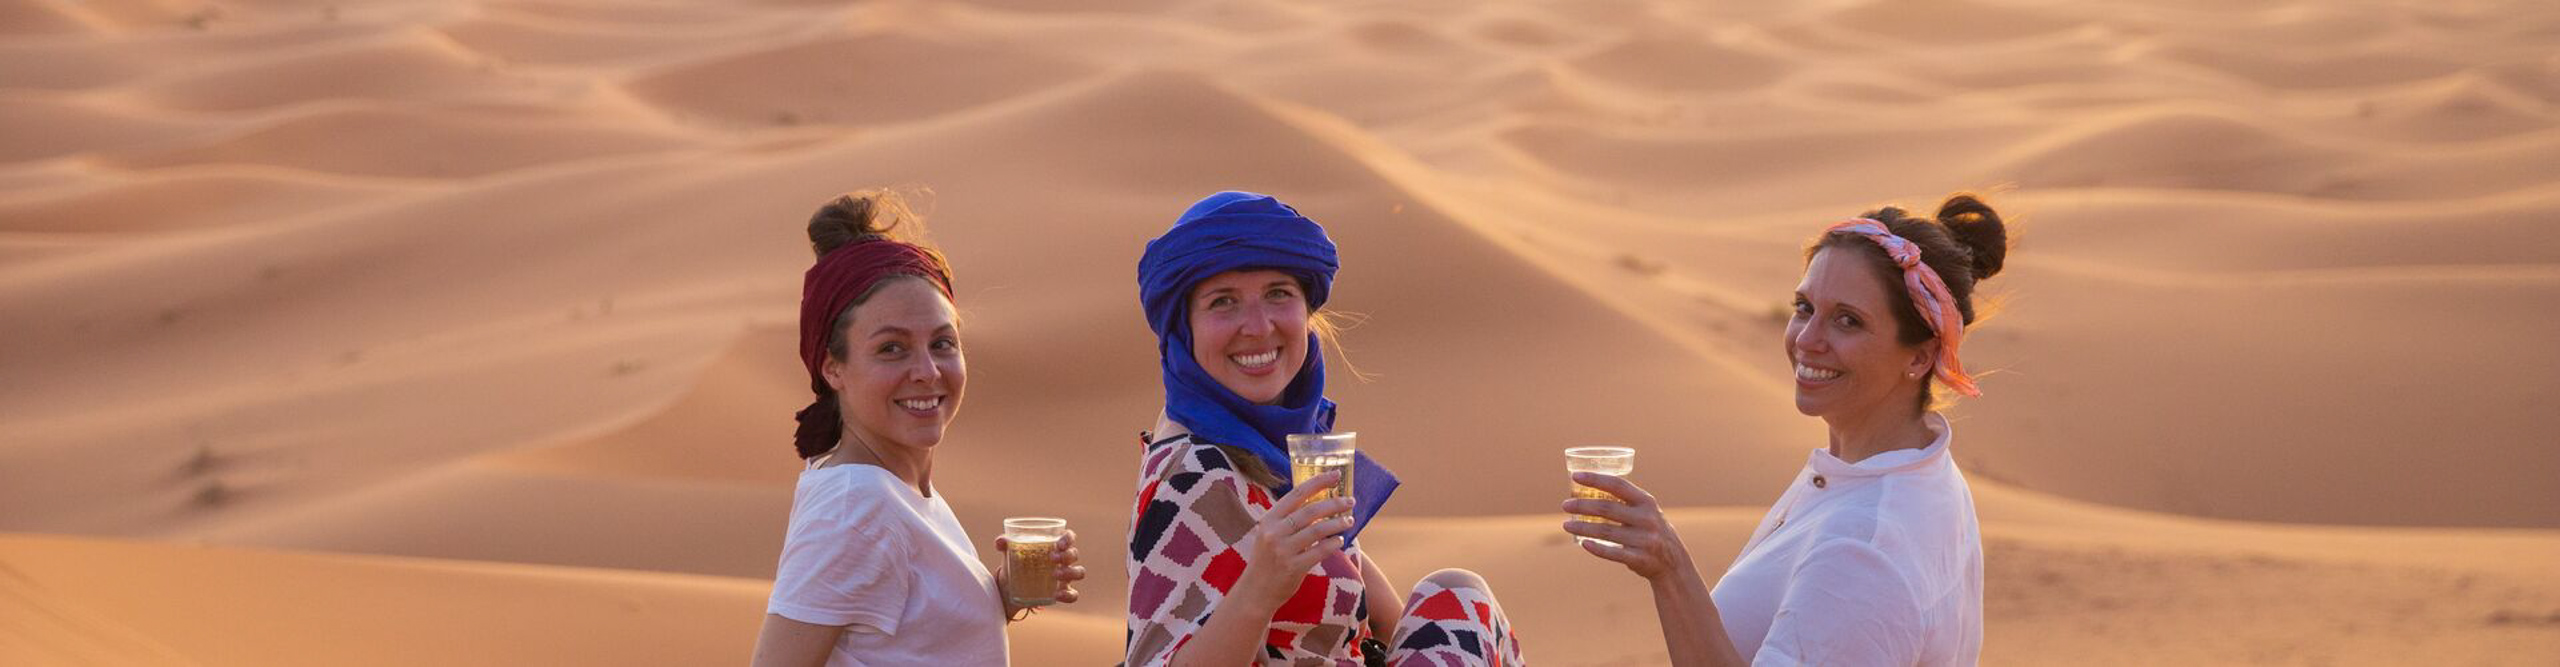 Women drinking wine in the Sahara Desert in the late afternoon sun, Morocco 